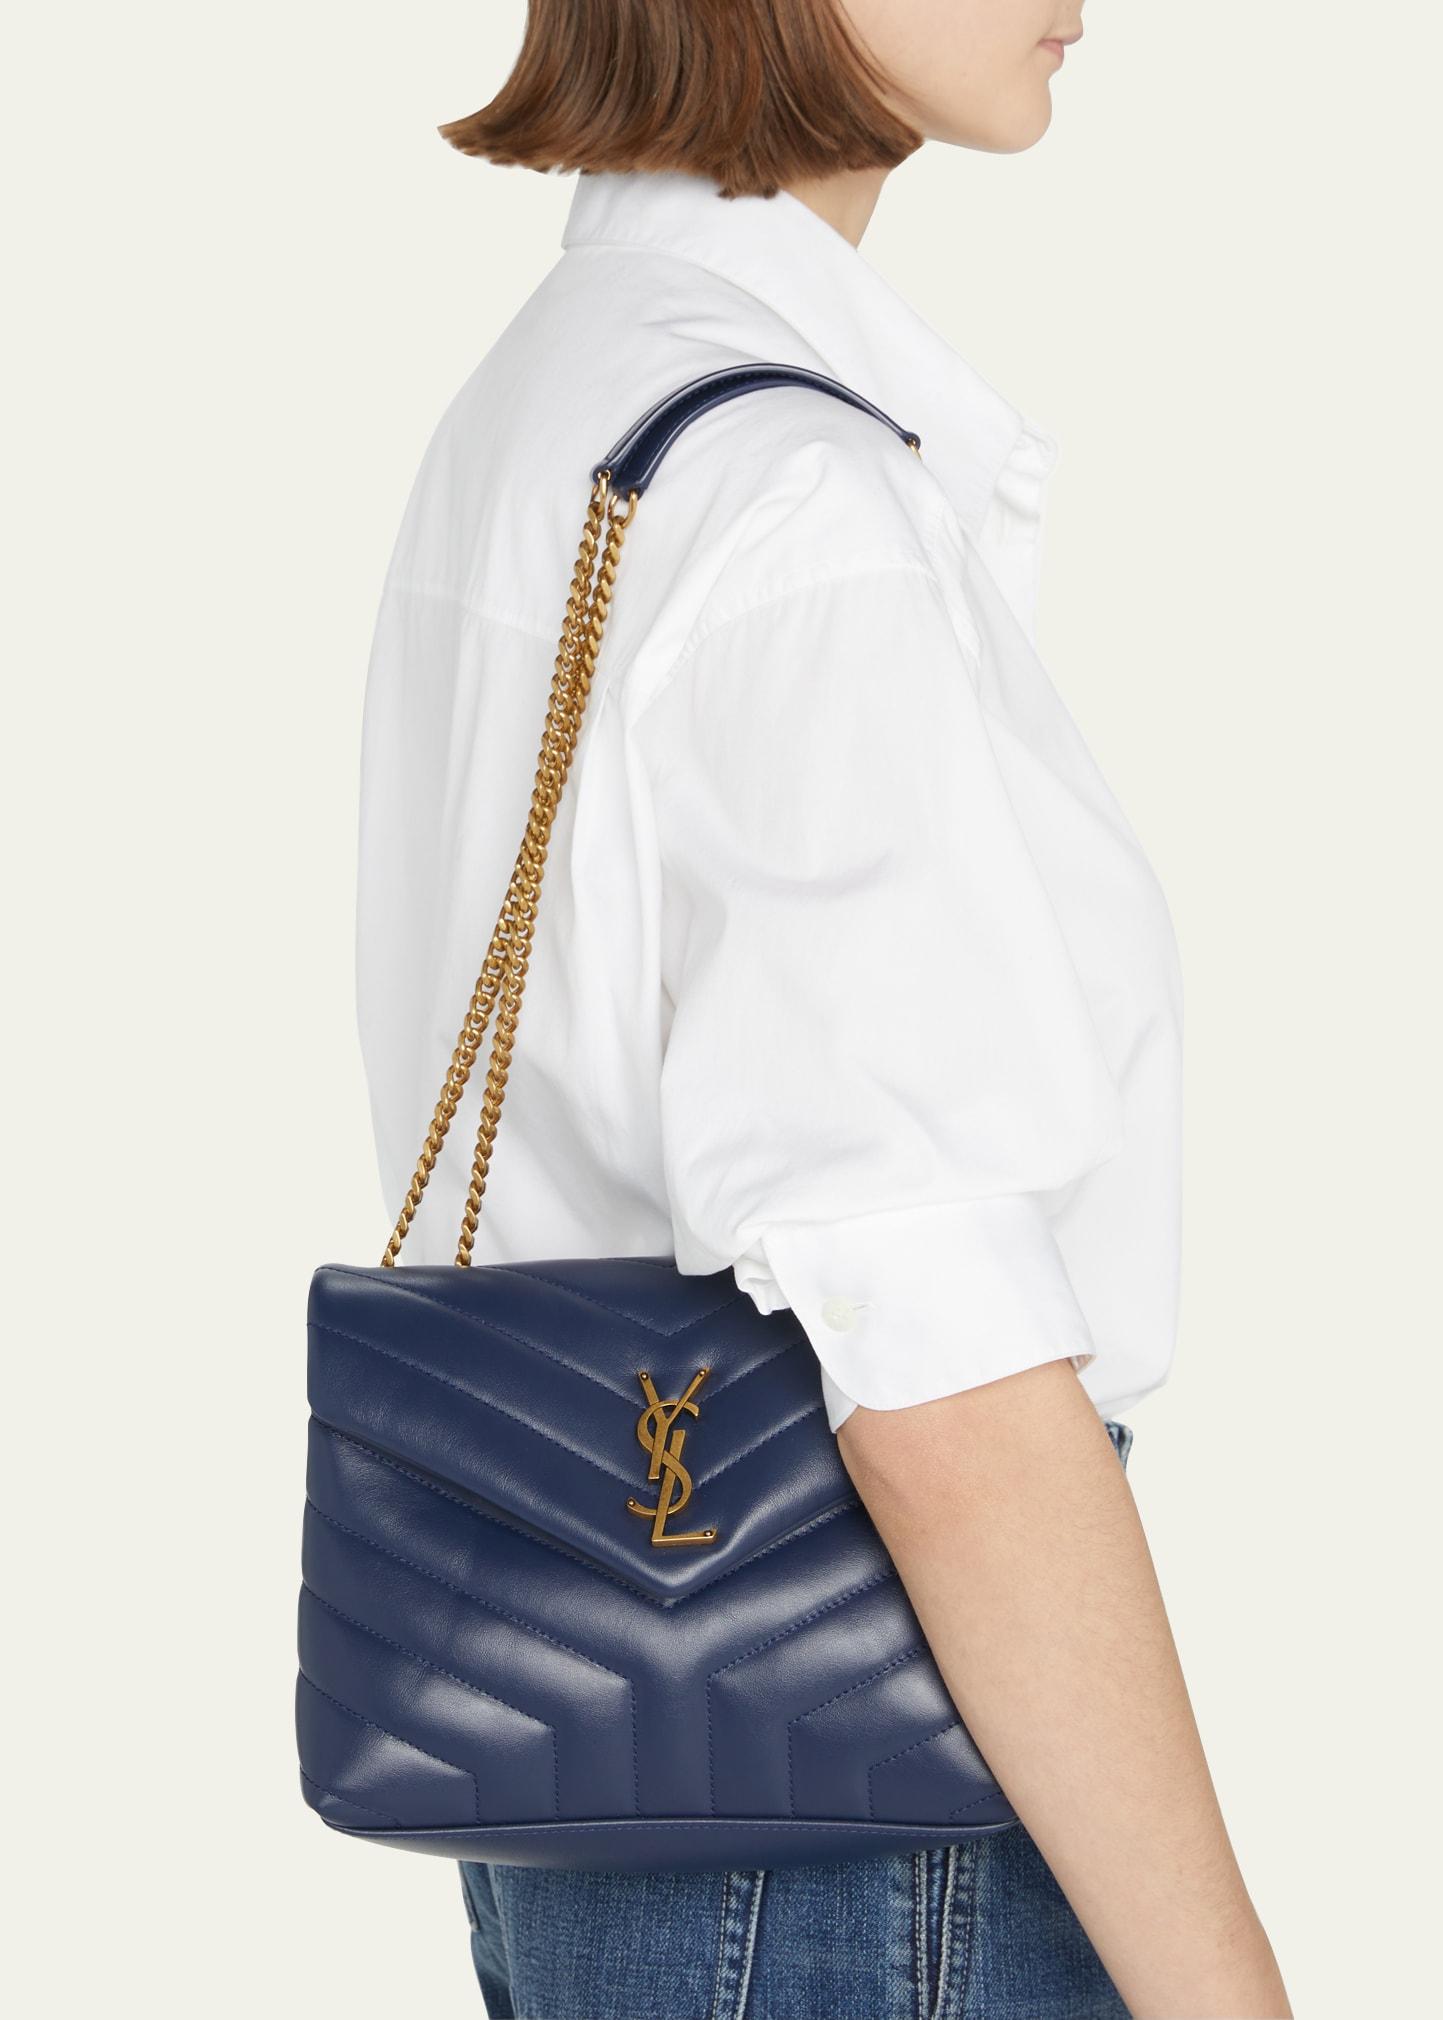 YSL Loulou Small Navy